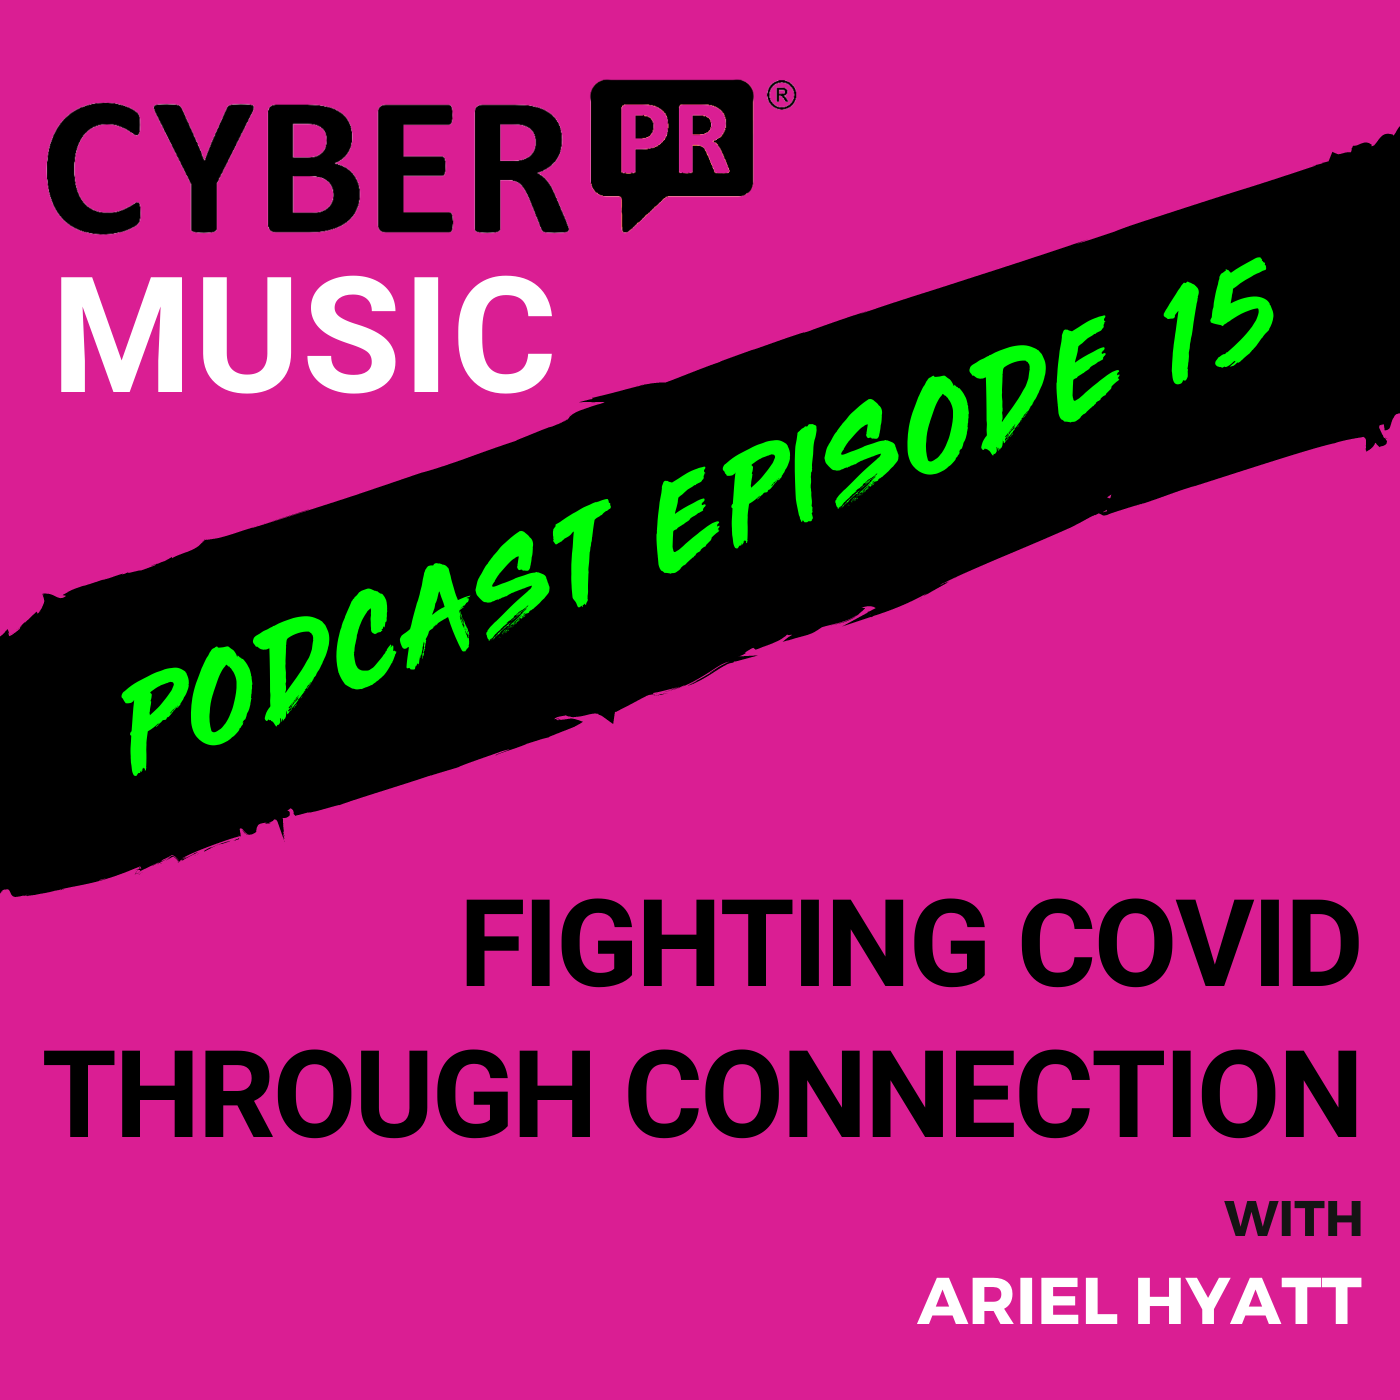 The Cyber PR Music Podcast EP 15: Fighting COVID Through Connection